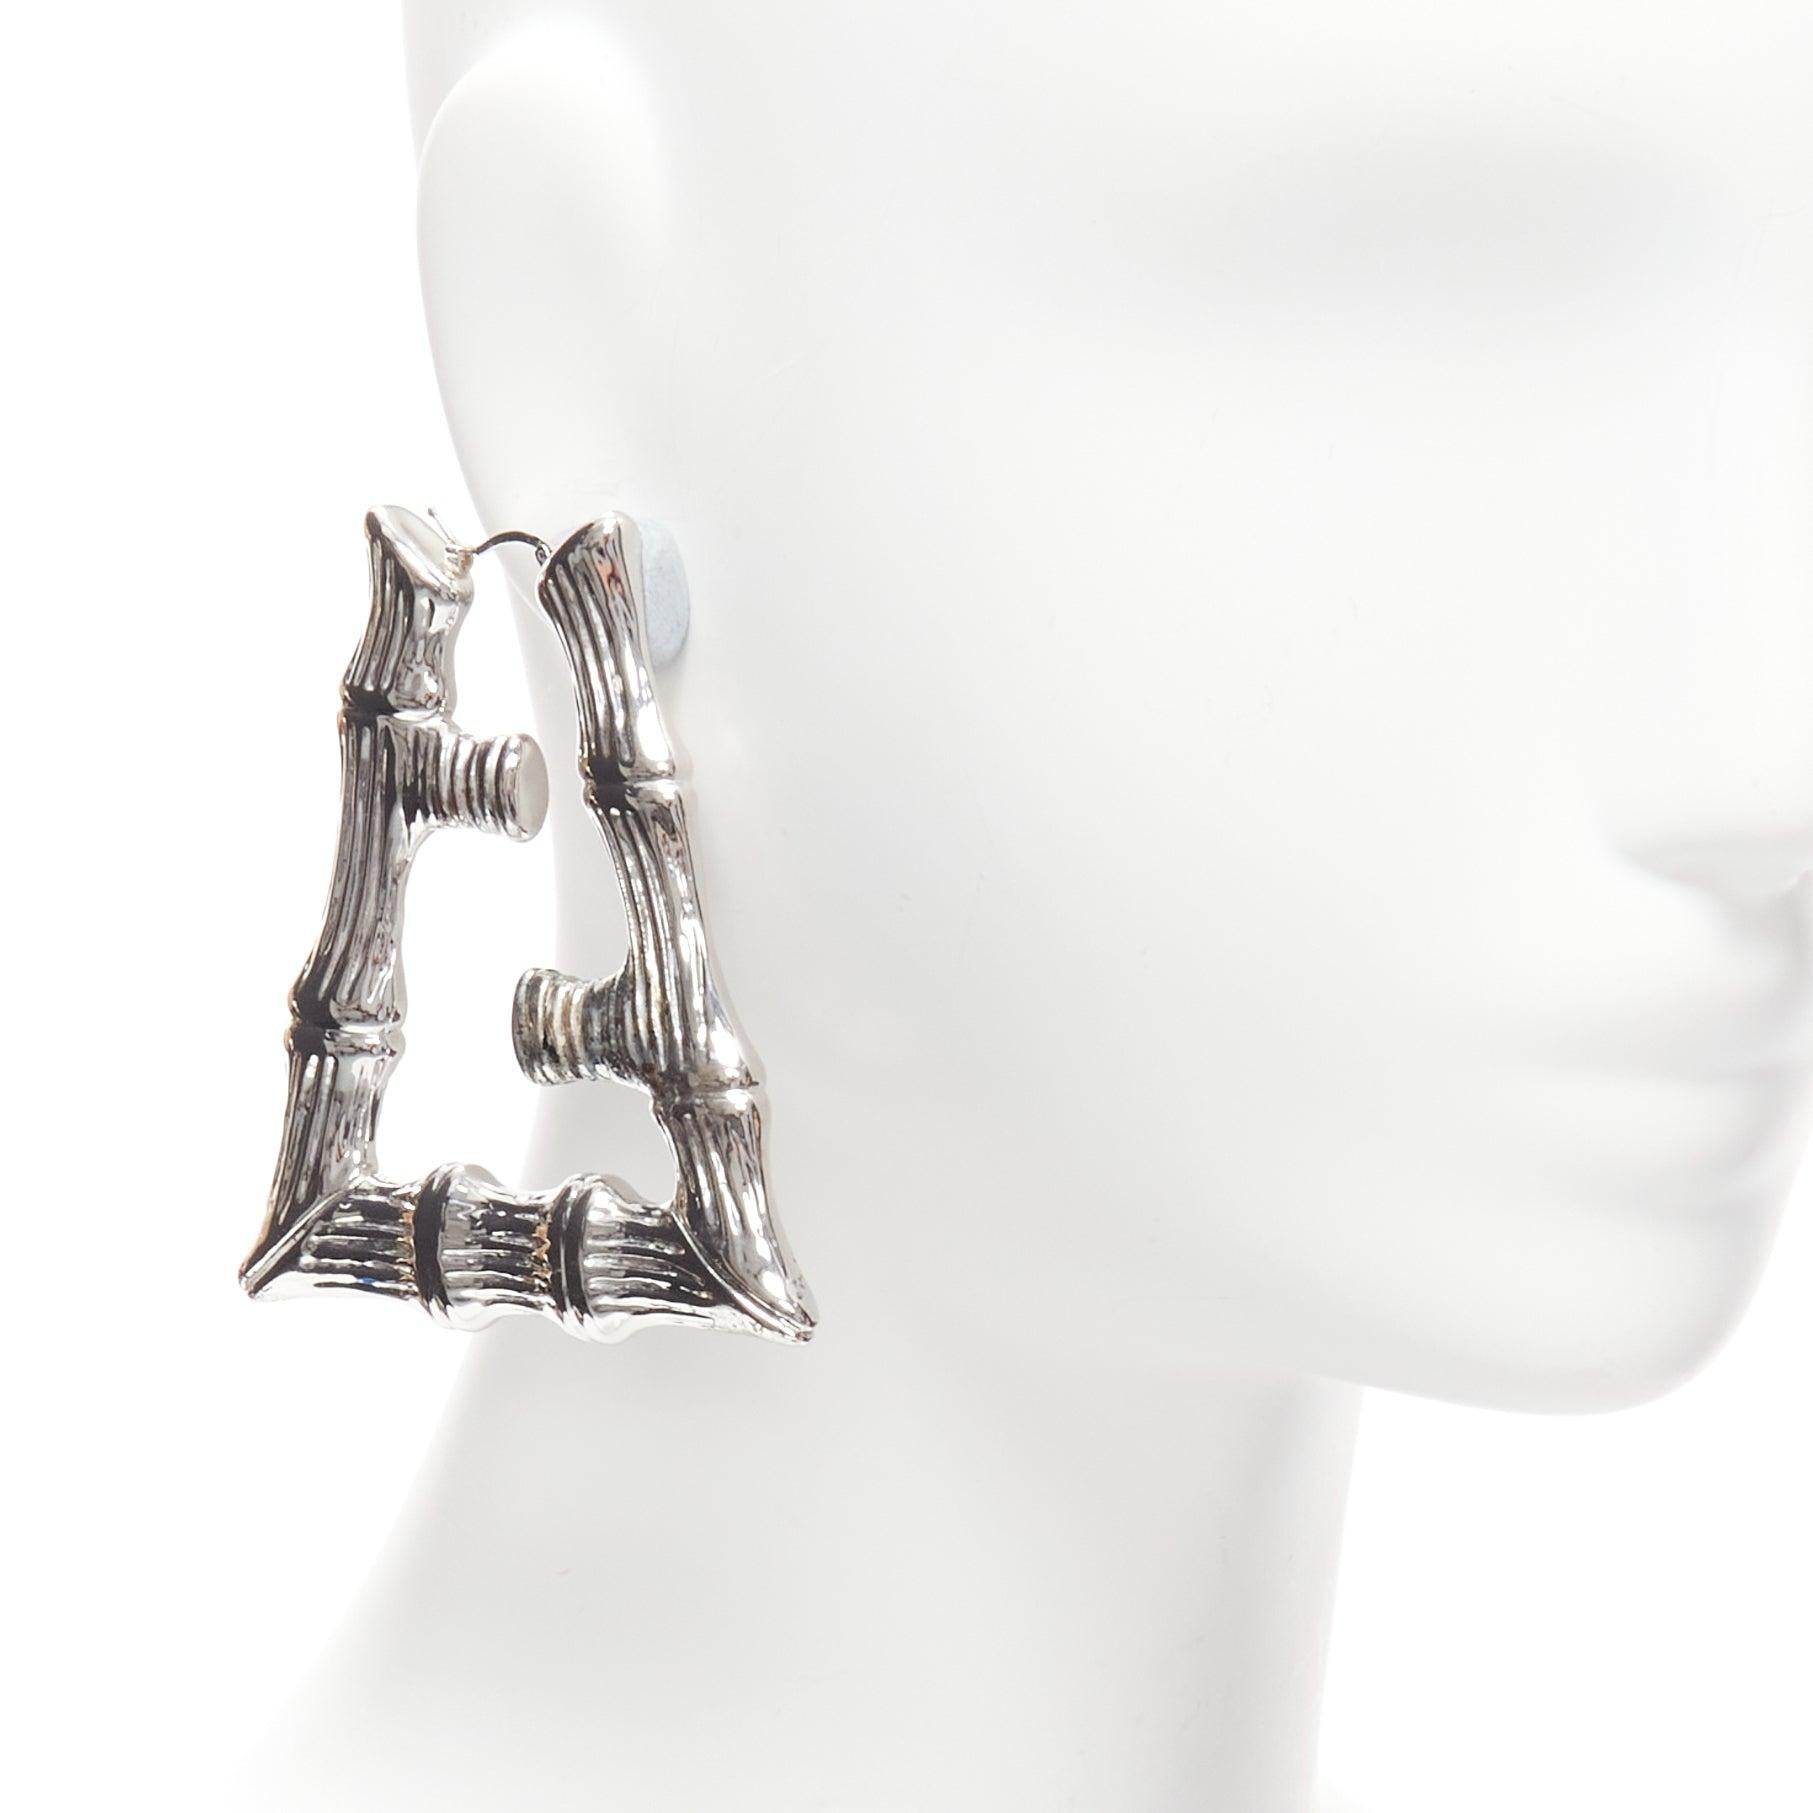 FENDI Nicki Minaj Prints On silver FF Bamboo statement earrings Pair
Reference: TGAS/D00708
Brand: Fendi
Collection: Nicki Minaj Prints On
Material: Metal
Color: Silver
Pattern: Solid
Closure: Loop Through
Lining: Silver Metal
Extra Details: Hoop